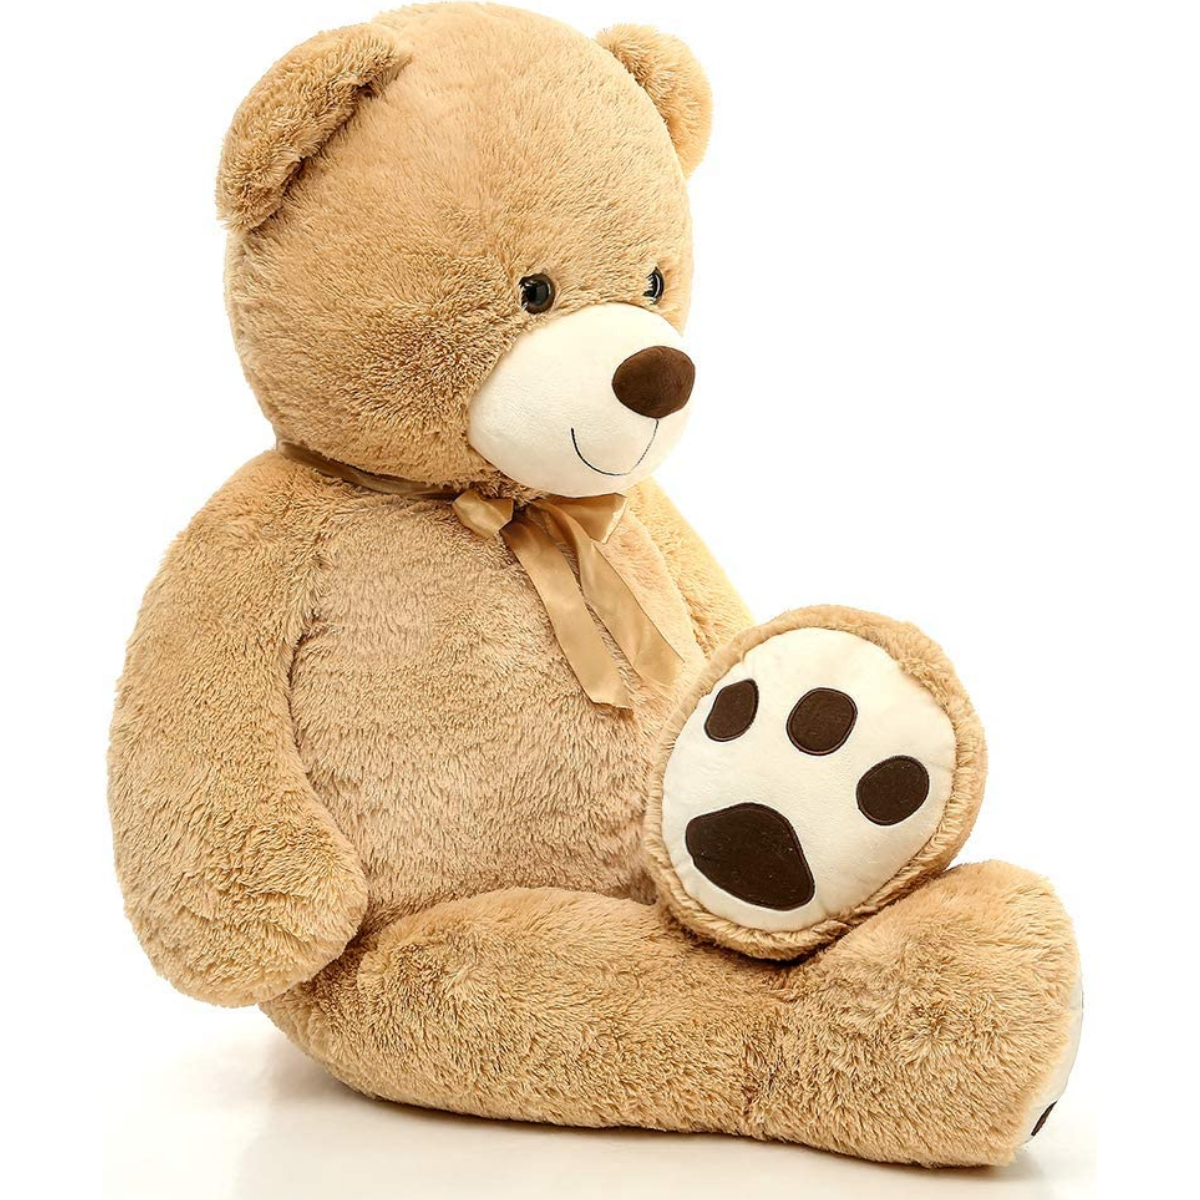 Giant Teddy Bear Plush Toy, Light Brown, 39/51 Inches